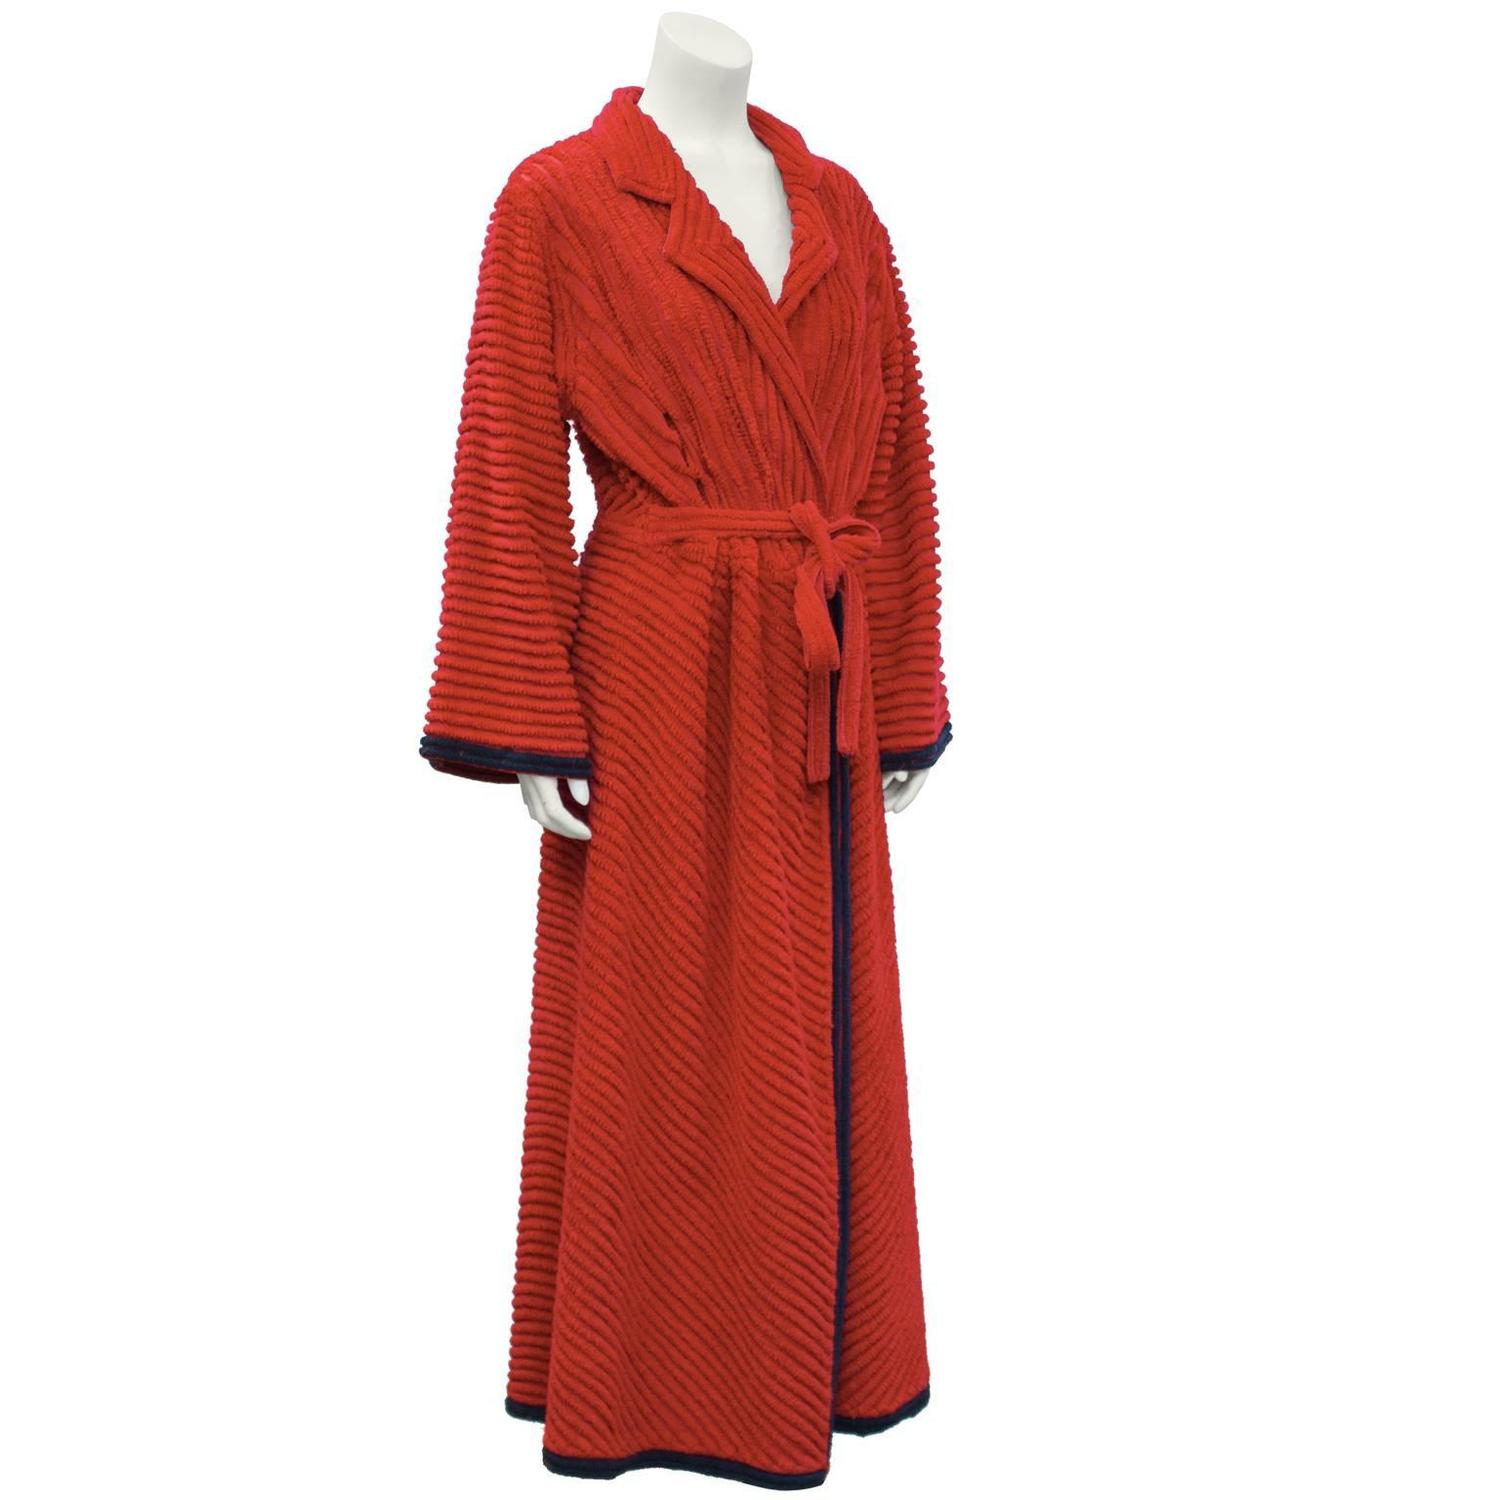 1950's Red Chenille Robe With Peacock For Sale at 1stdibs